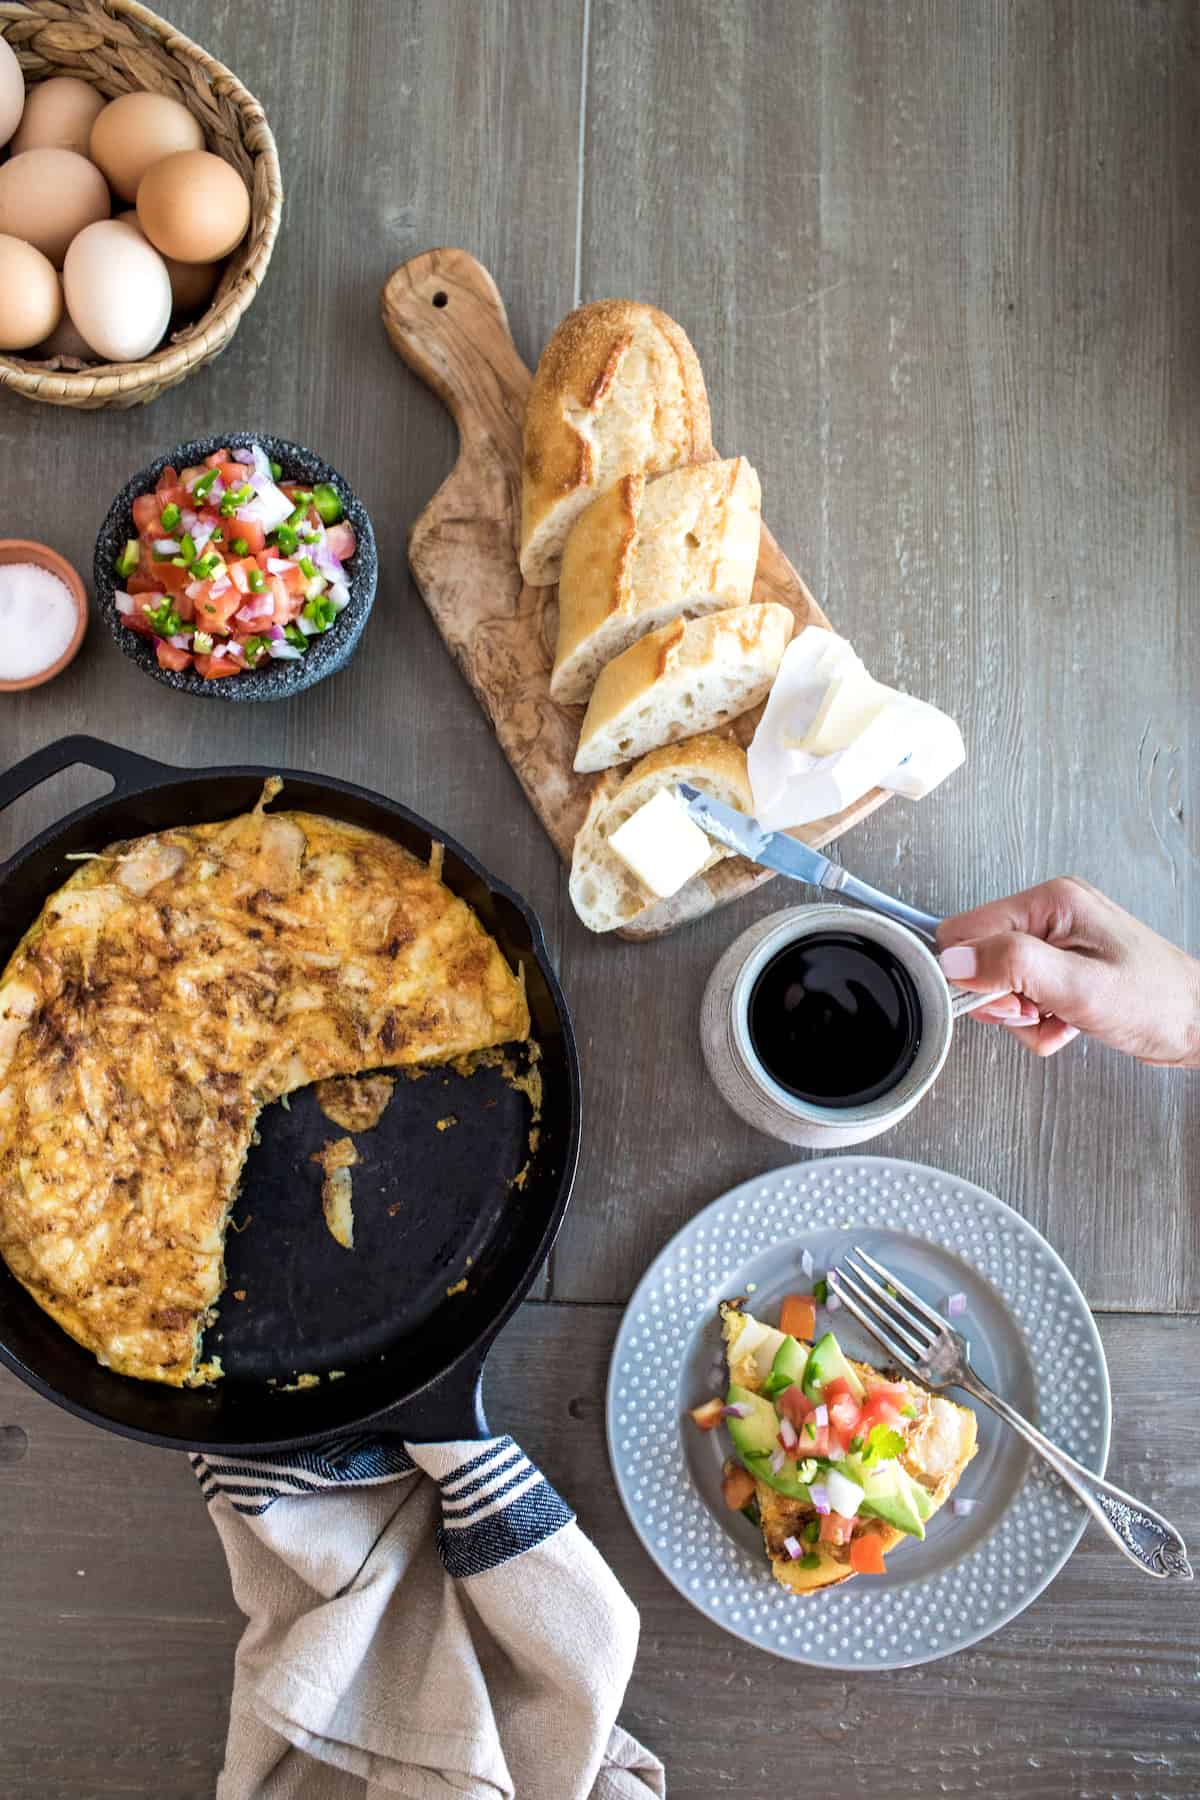 flat lay shot of a breakfast table with a cast iron skillet filled with chorizo potato frittata with a few slices taken out, one slice of frittata on a plate topped with garnishes, and a woman's hand grabbing a cup of coffee.